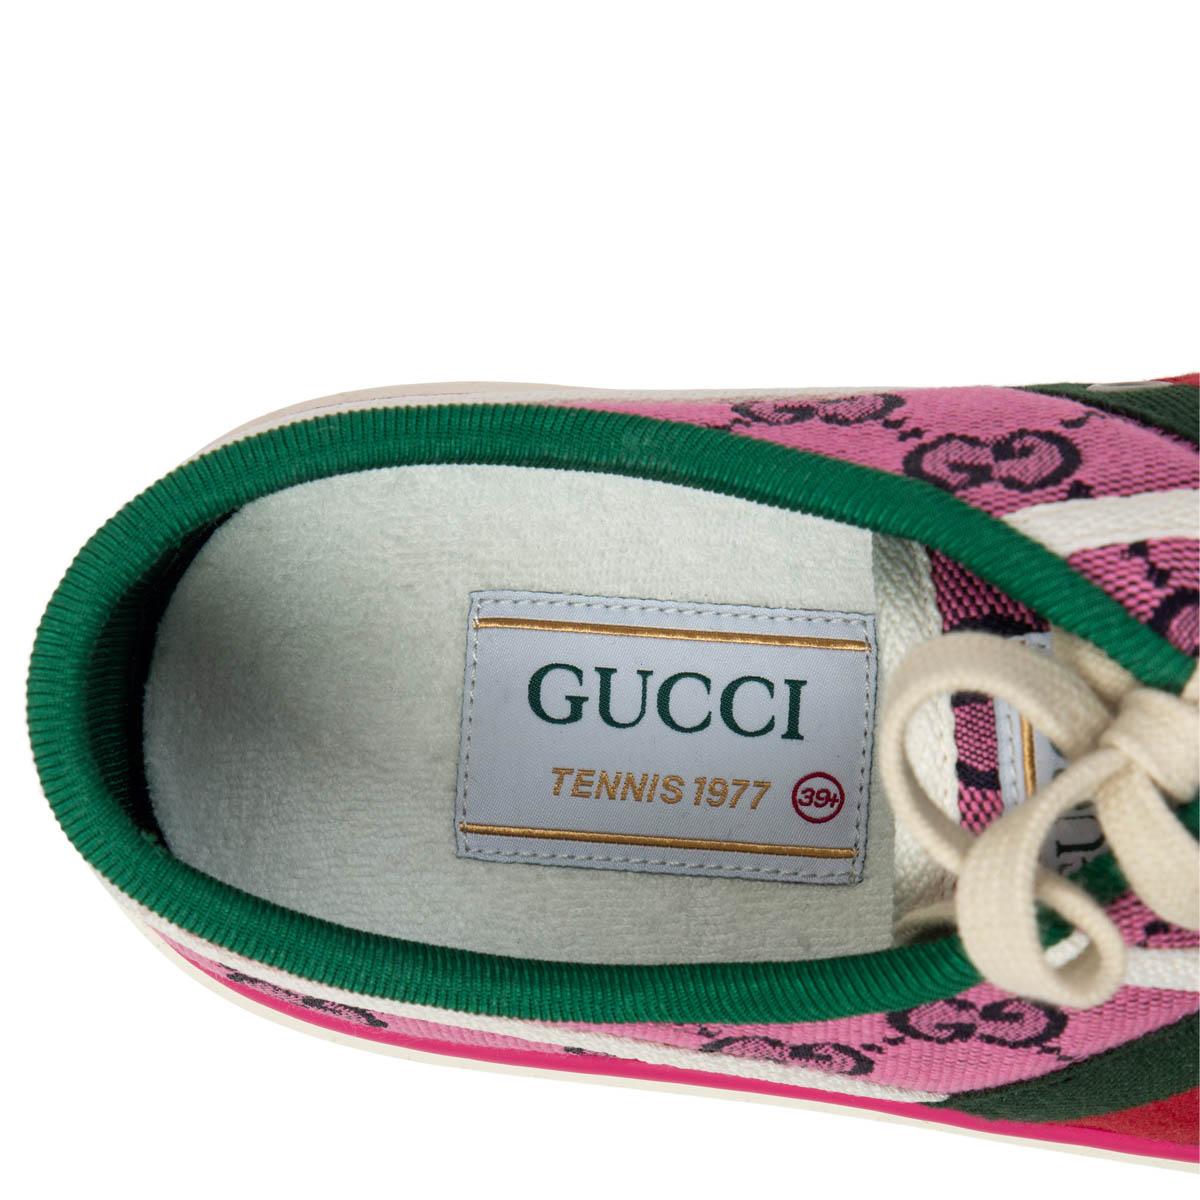 Beige GUCCI pink GG TENNIS 1977 Sneakers GG Canvas Shoes 39.5